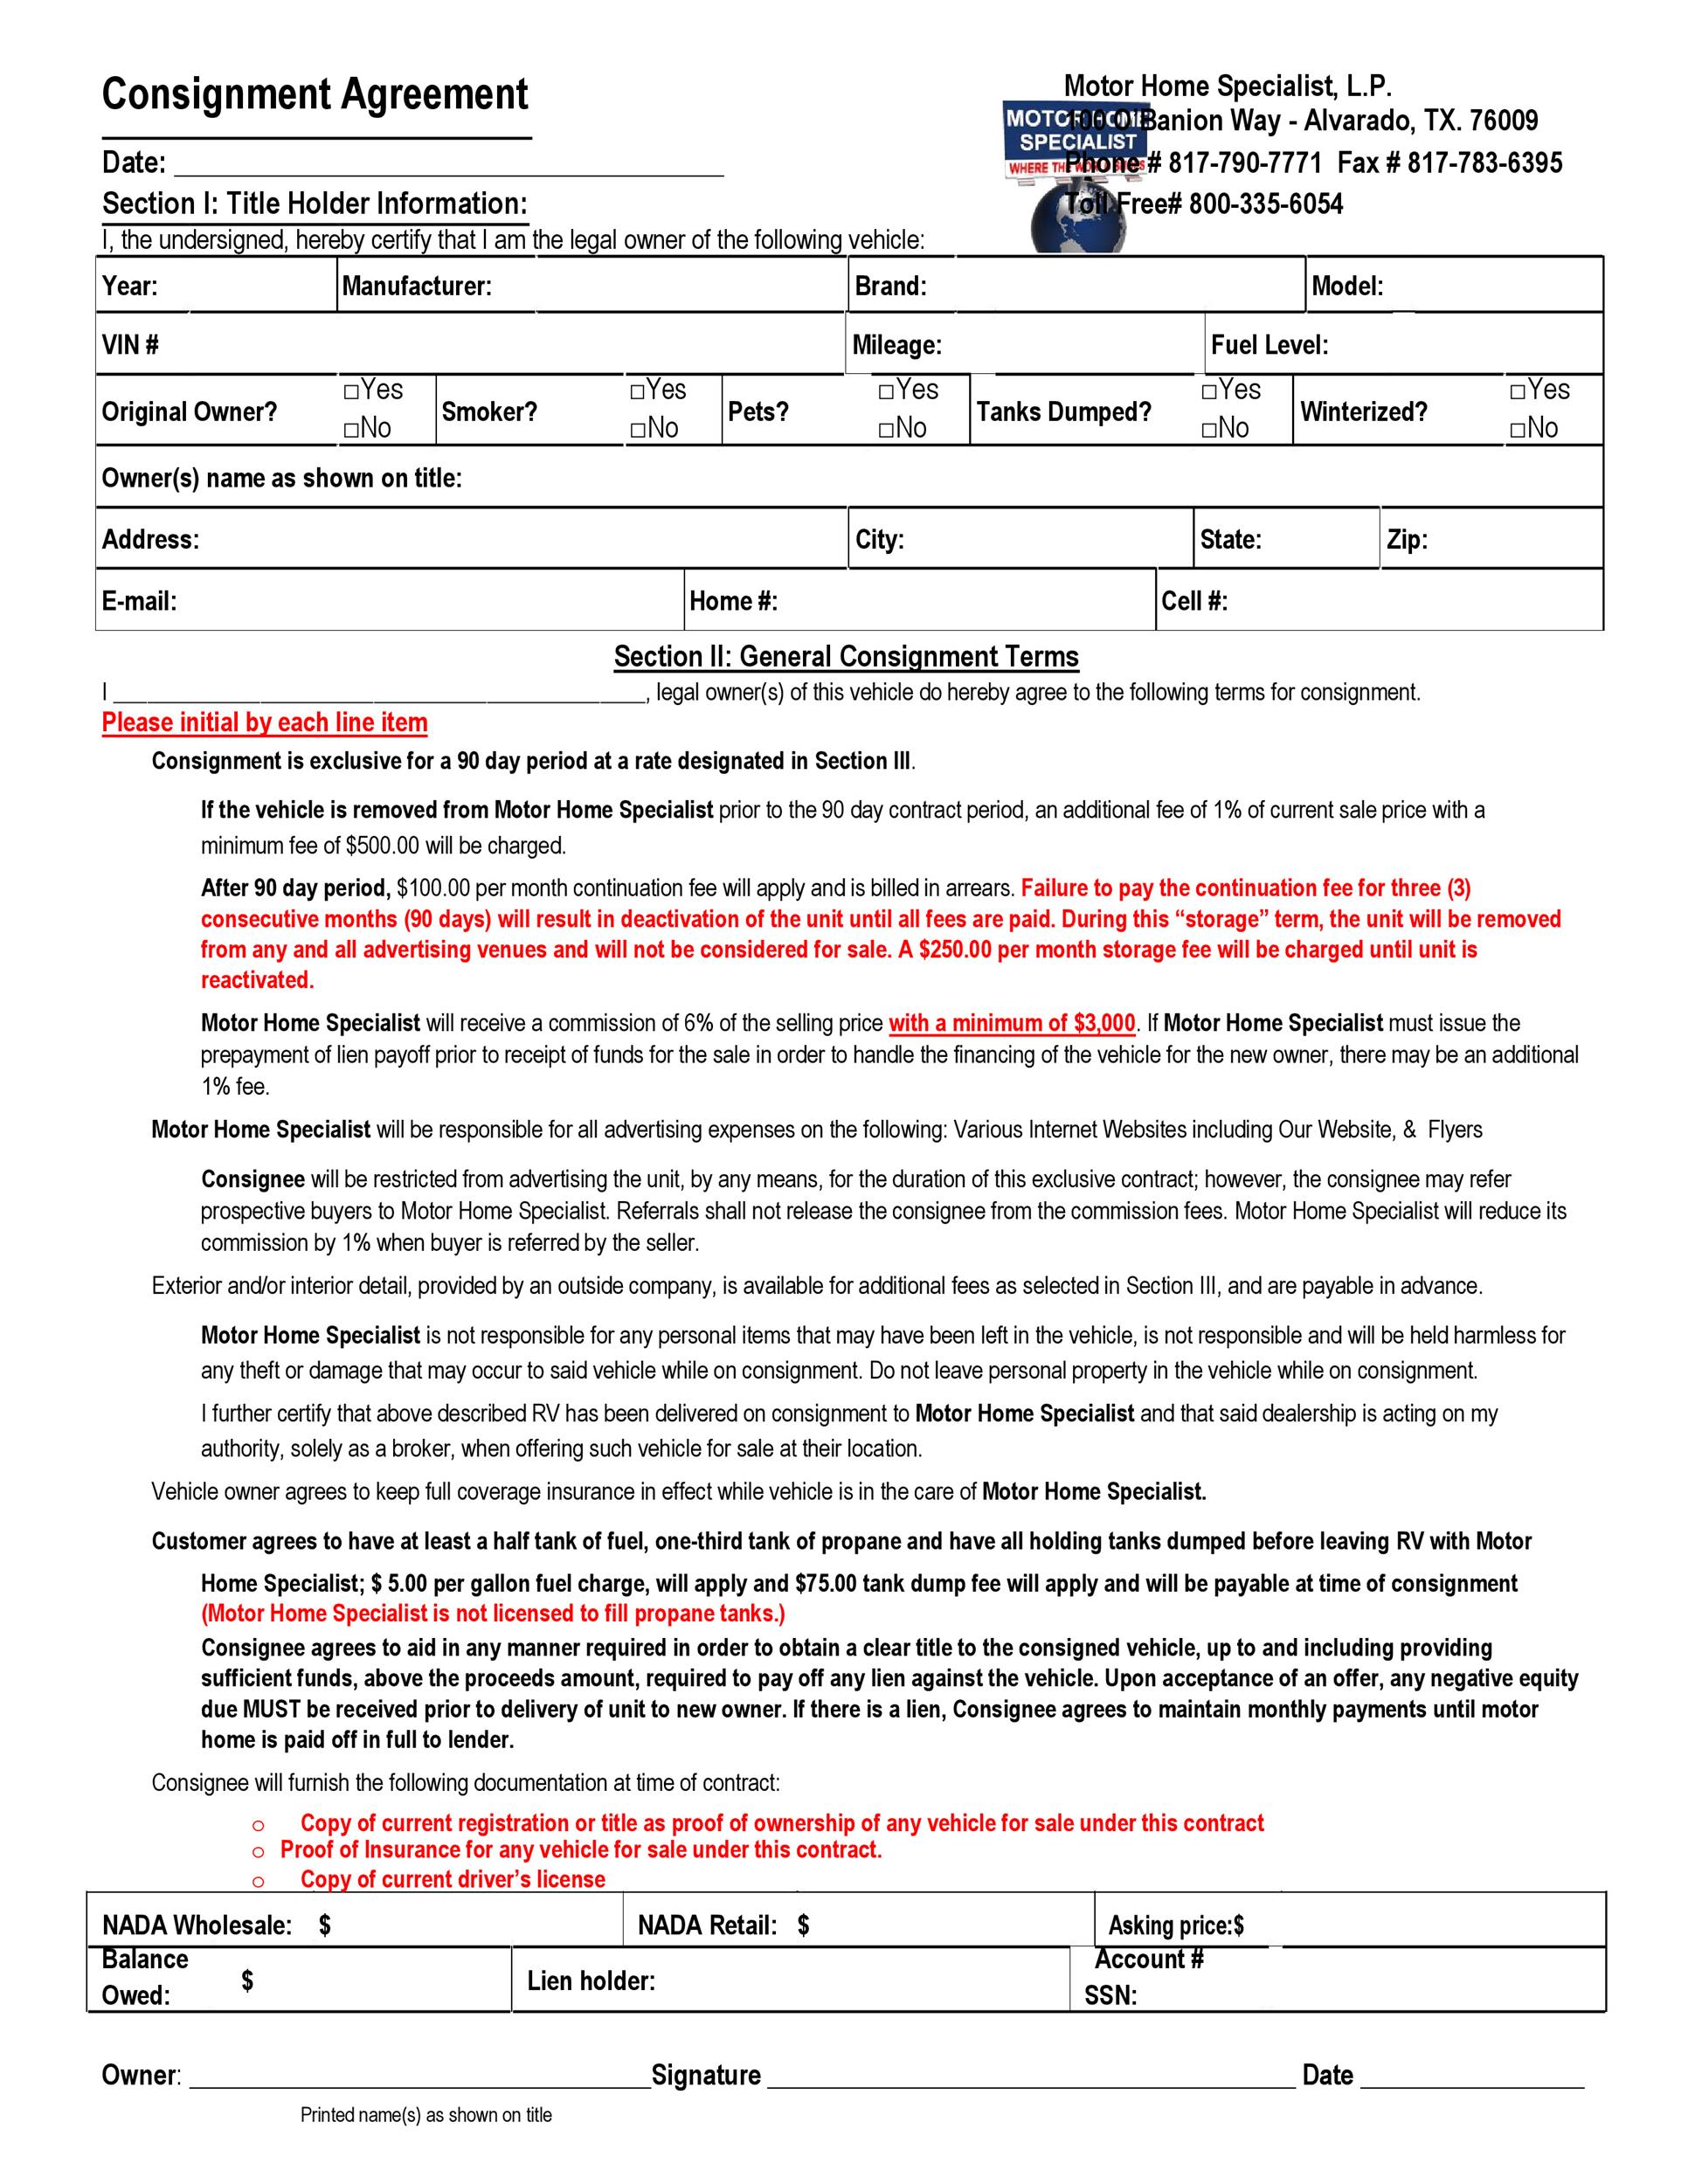 Free Consignment Agreement Template 19